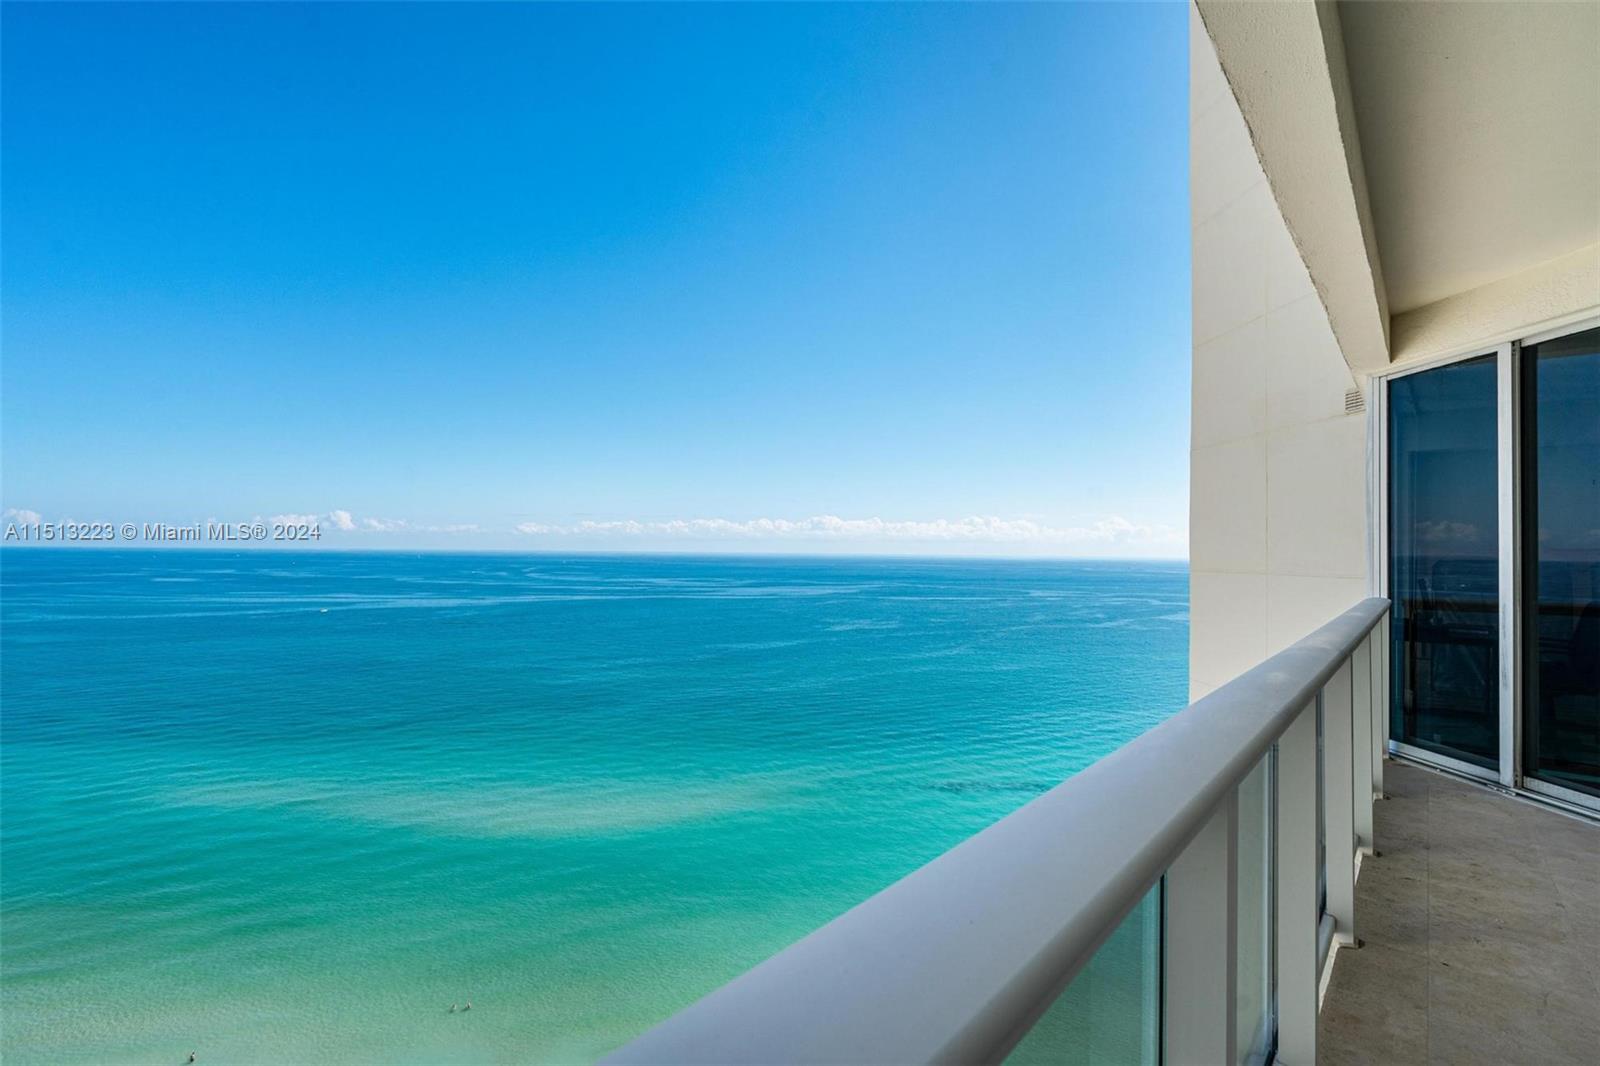 Rare opportunity to own 2 Story Beachfront Penthouse.Move-in and enjoy luxury living in the unit stretching from a sunrise Ocean view balcony to a sunset Intracoastal view balcony. Stairs up to the 2nd floor reveal an entertainment room and with additional 2000 sq ft  of rooftop that can be transformed into a lavishly landscaped outdoor oasis surrendered with open deck to the sky & Miami , Create your own dream beach escape, Architectural designs are available. Start upgrading to your dream villa in the sky. Sunny Isles Beach lifestyle!